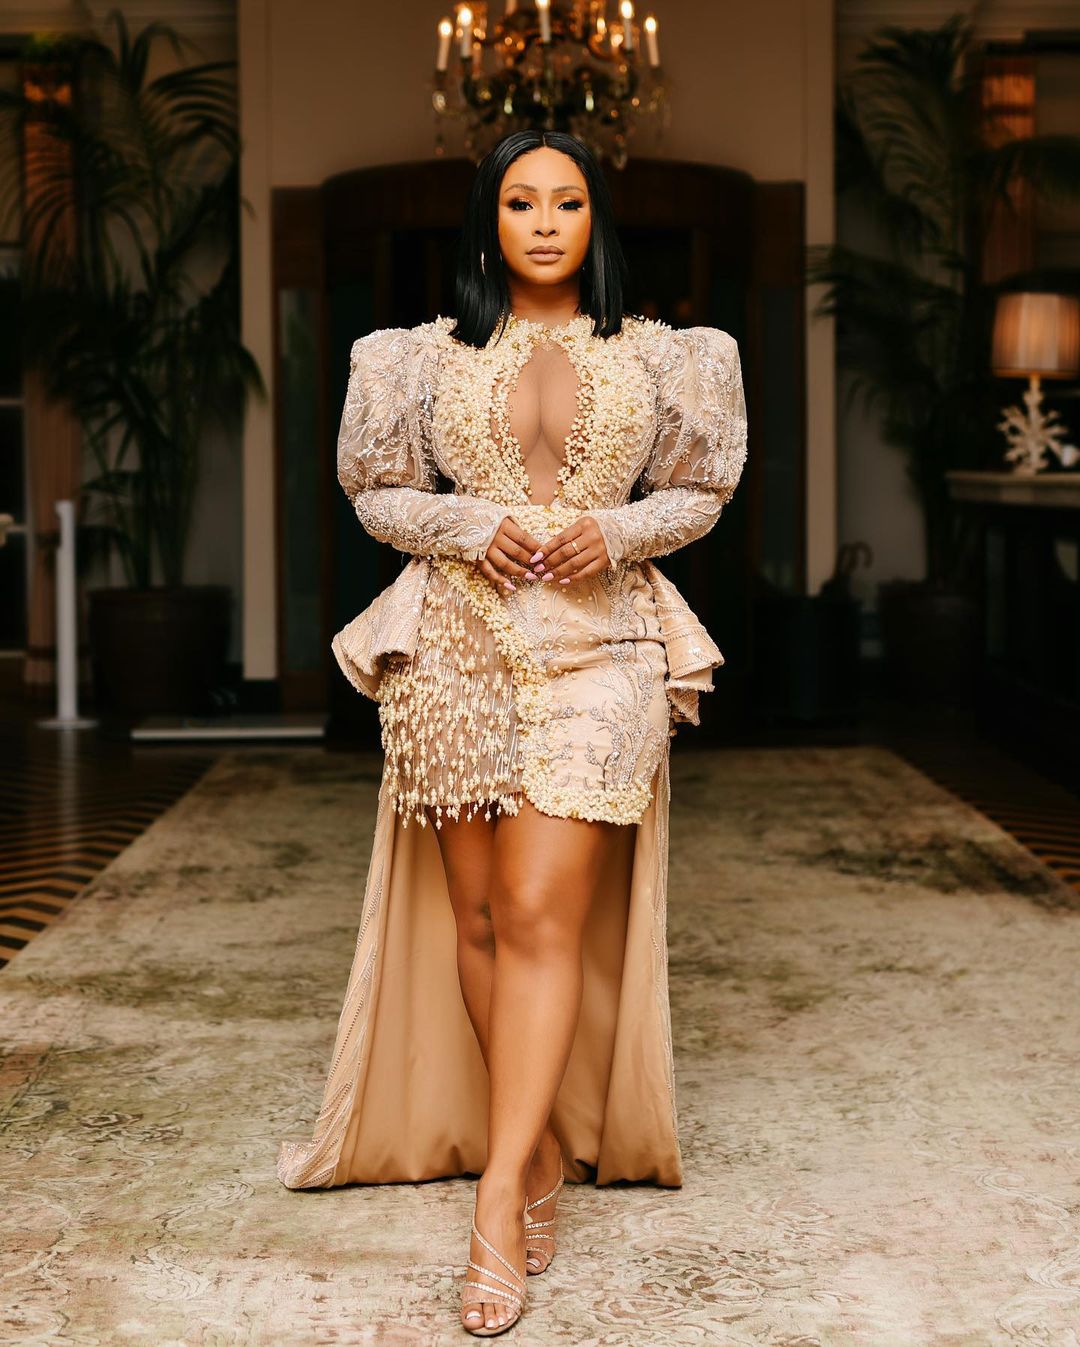 Boity Thulo- Classy Party Outfit